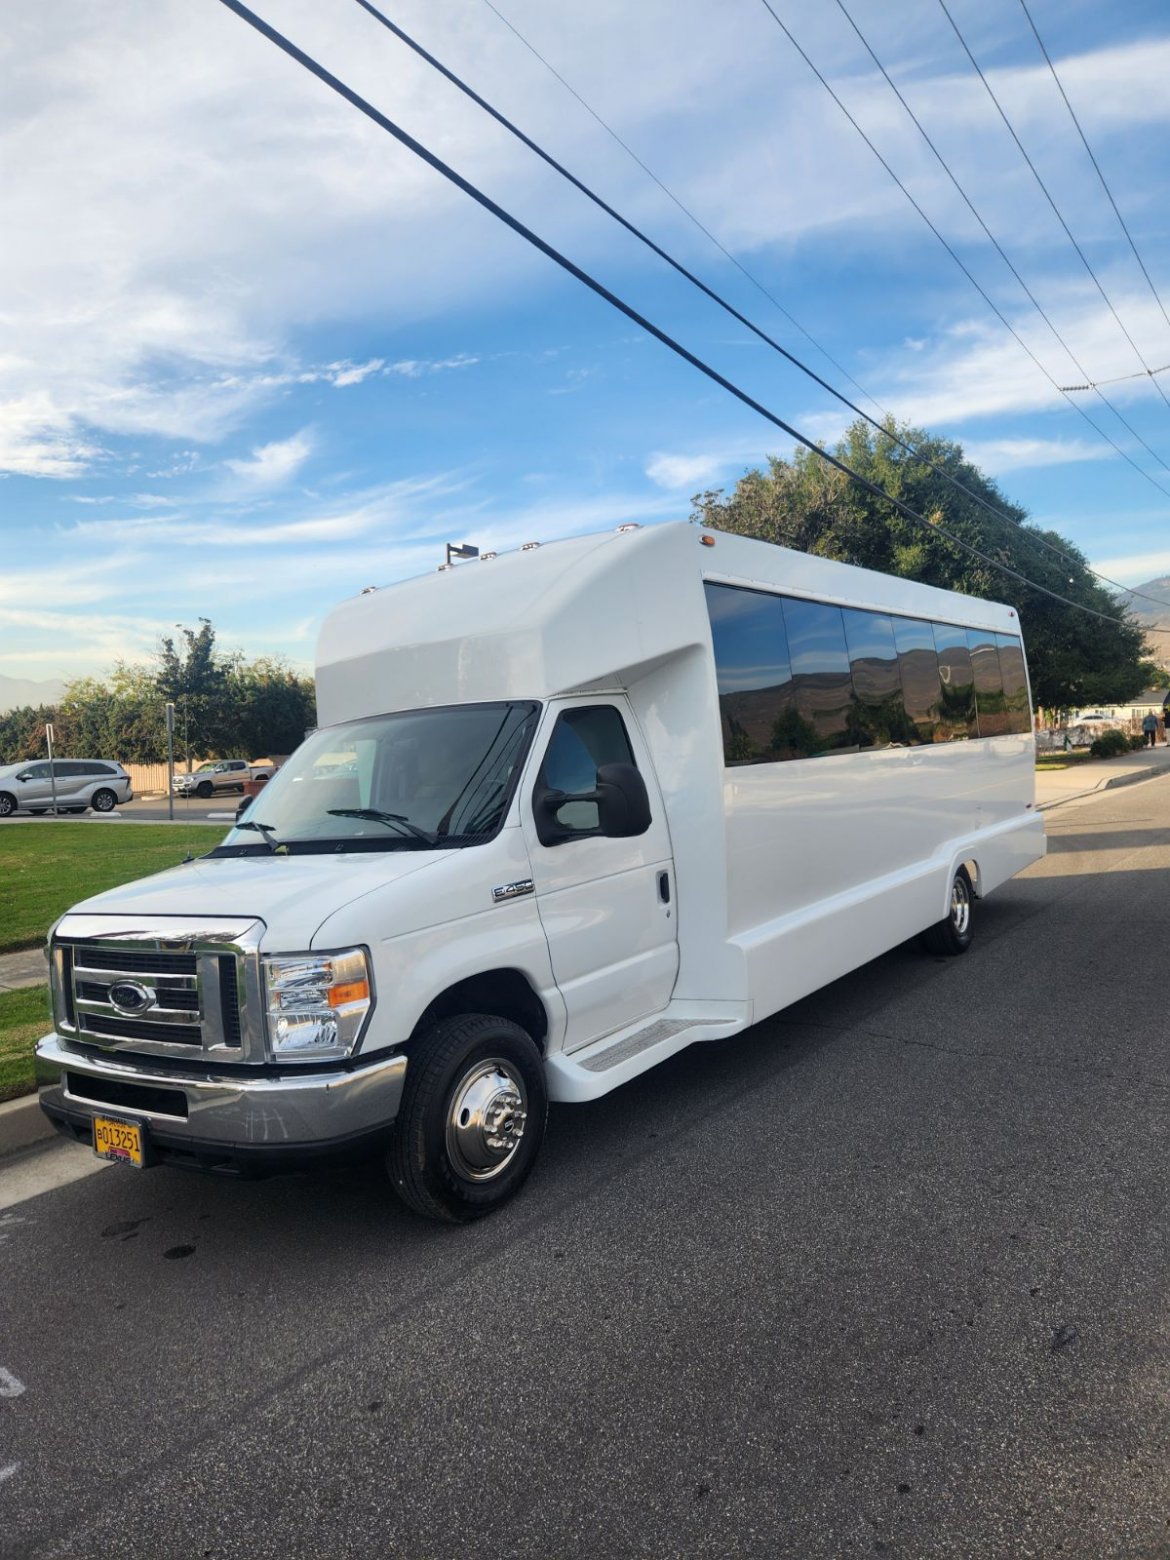 Limo Bus for sale: 2011 Ford E450 by ECB